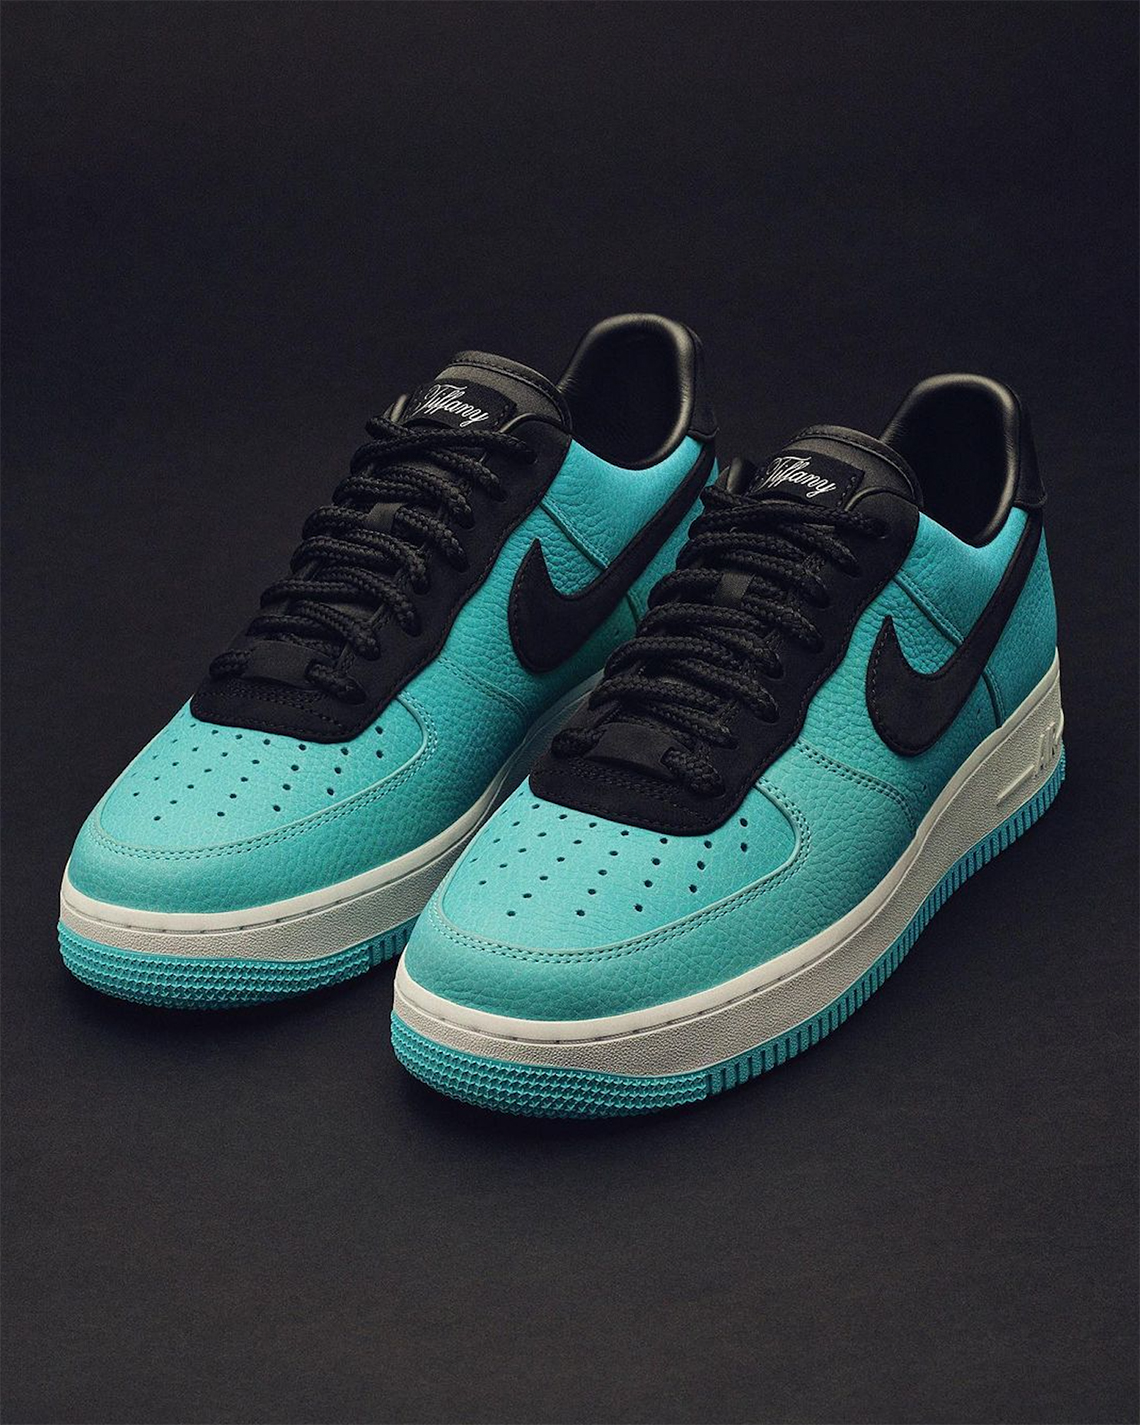 tiffany-nike-air-force-1-friends-and-family-blue-1.jpg